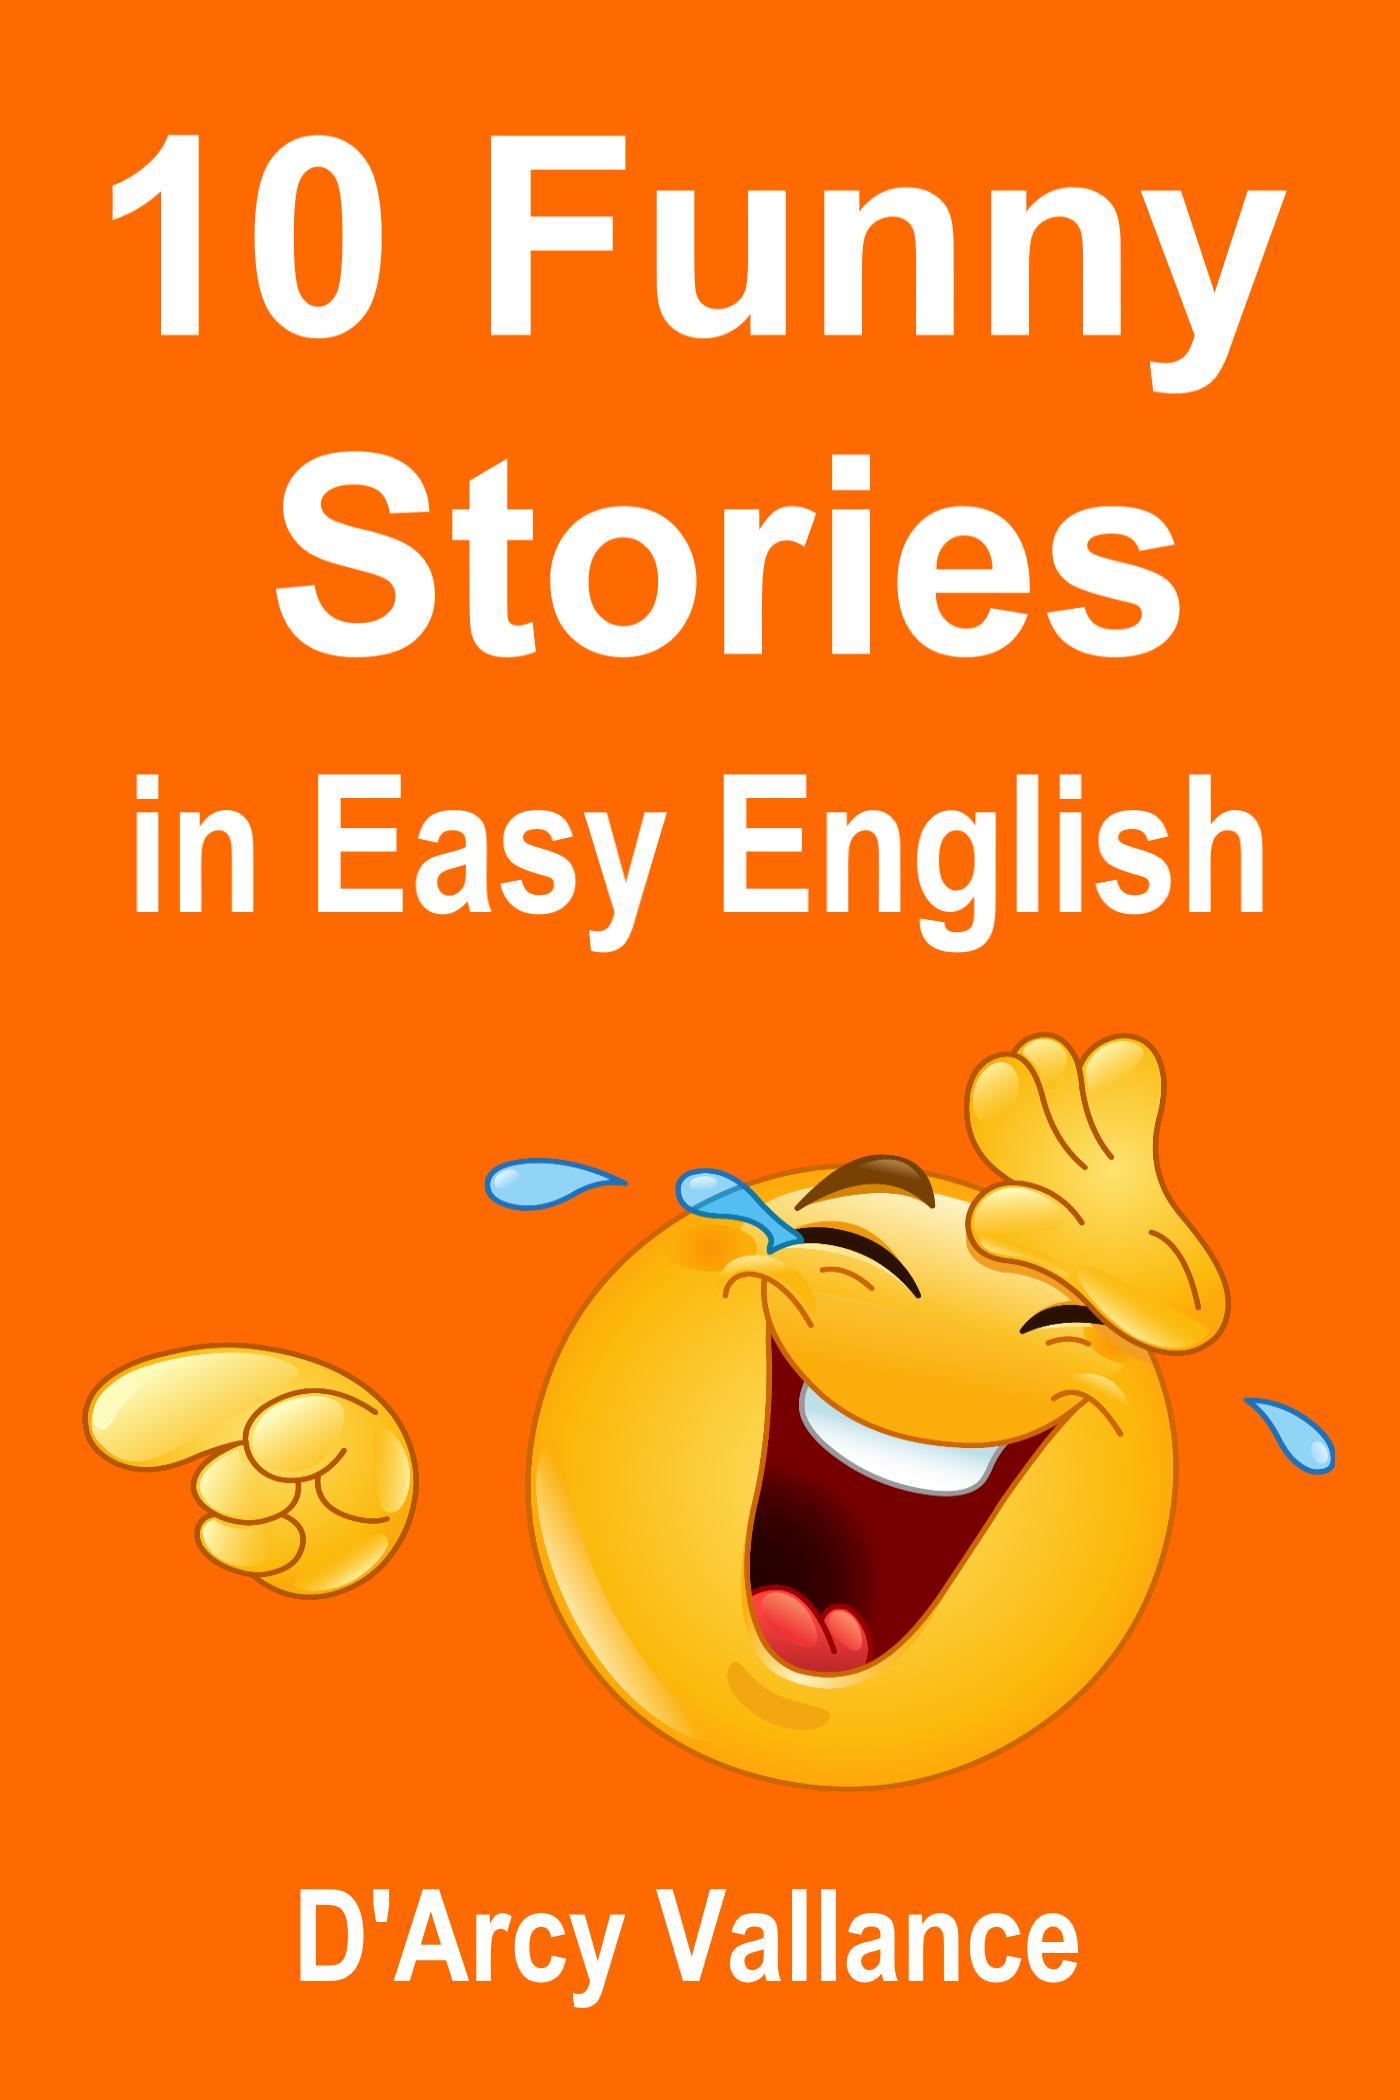 Smashwords – 10 Funny Stories in Easy English – a book by Darcy Vallance